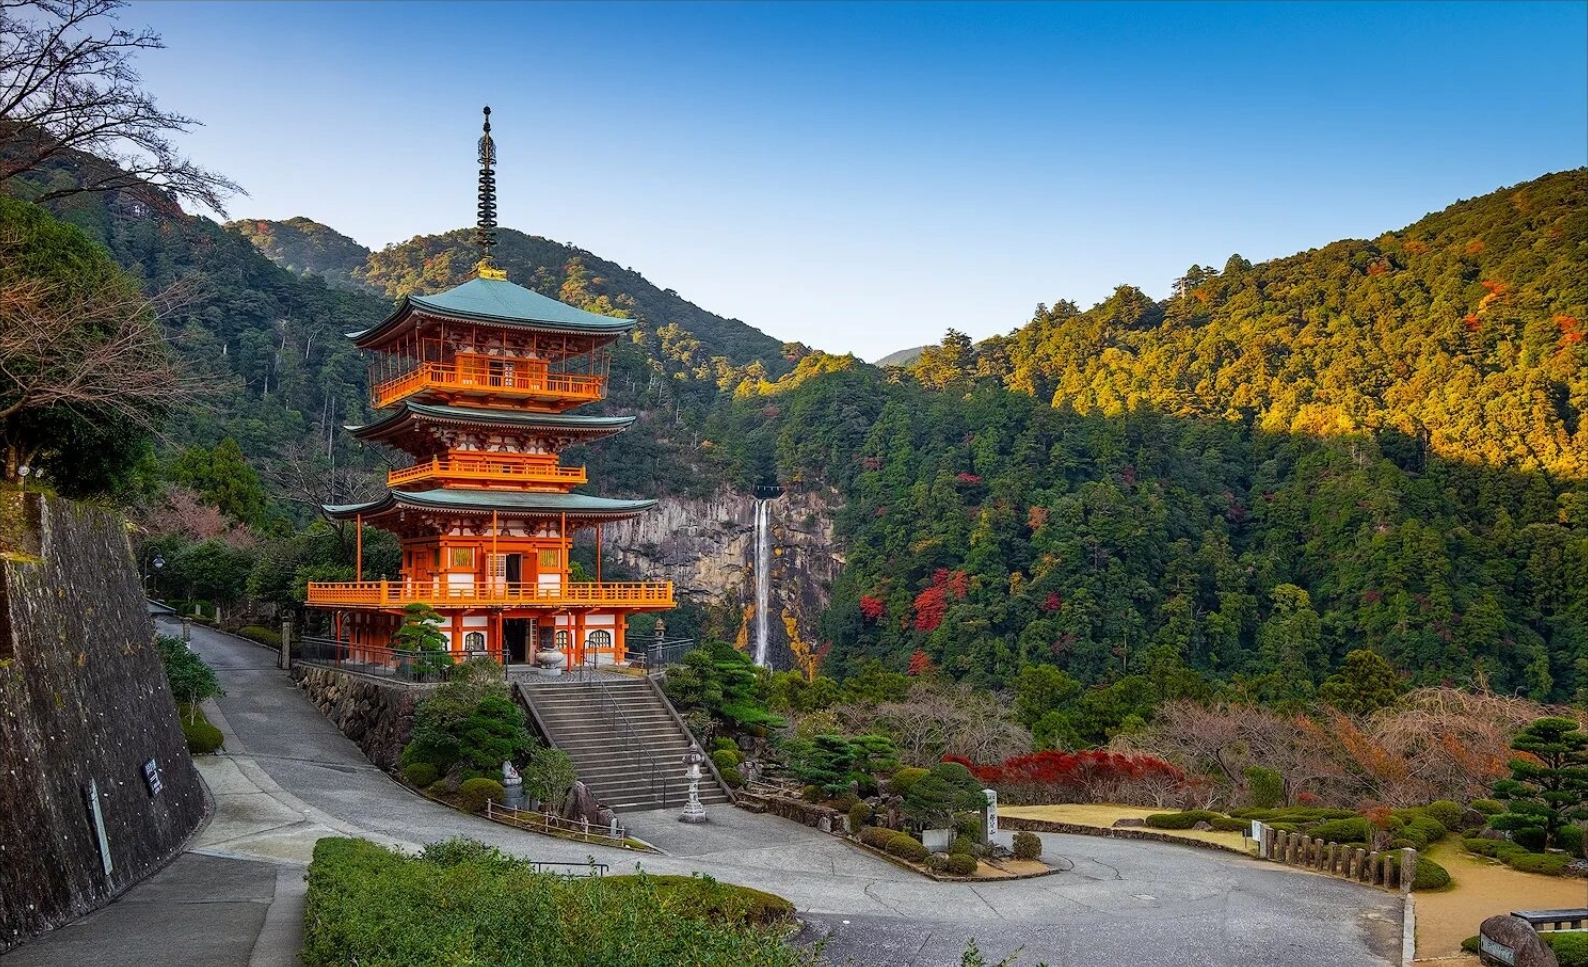 Things to Do in Wakayama Prefecture: Unmissable Attractions and Activities